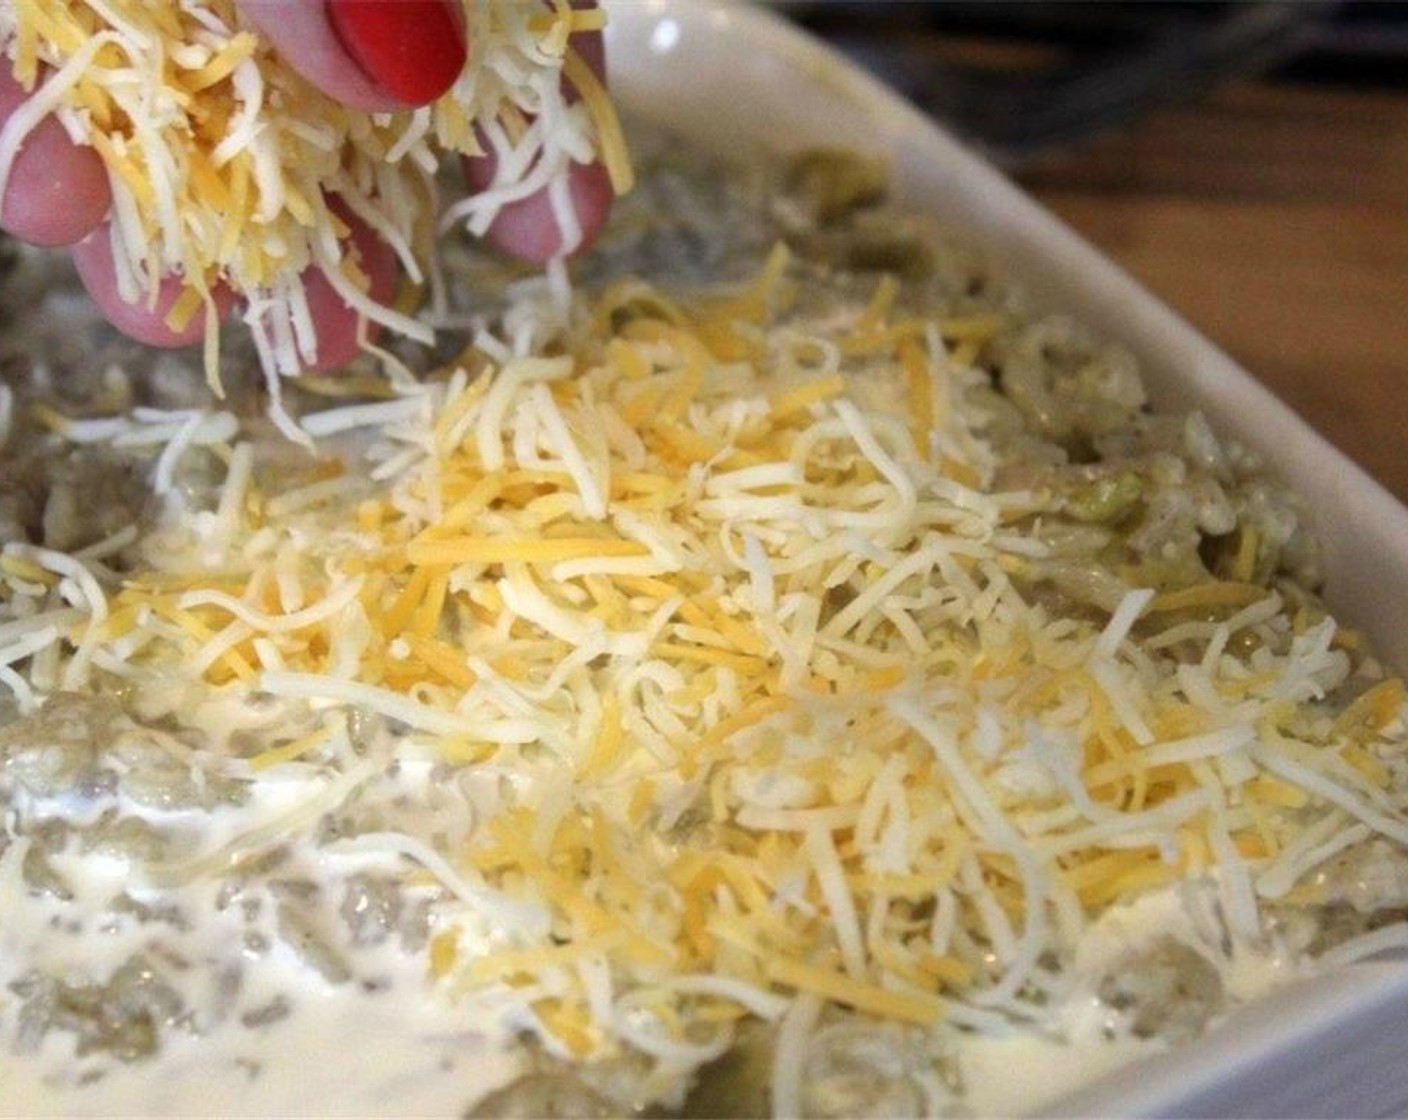 step 11 Now, spread the mixture into a baking dish, and sprinkle the rest of the Shredded Cheese (1/2 cup) all over the top.